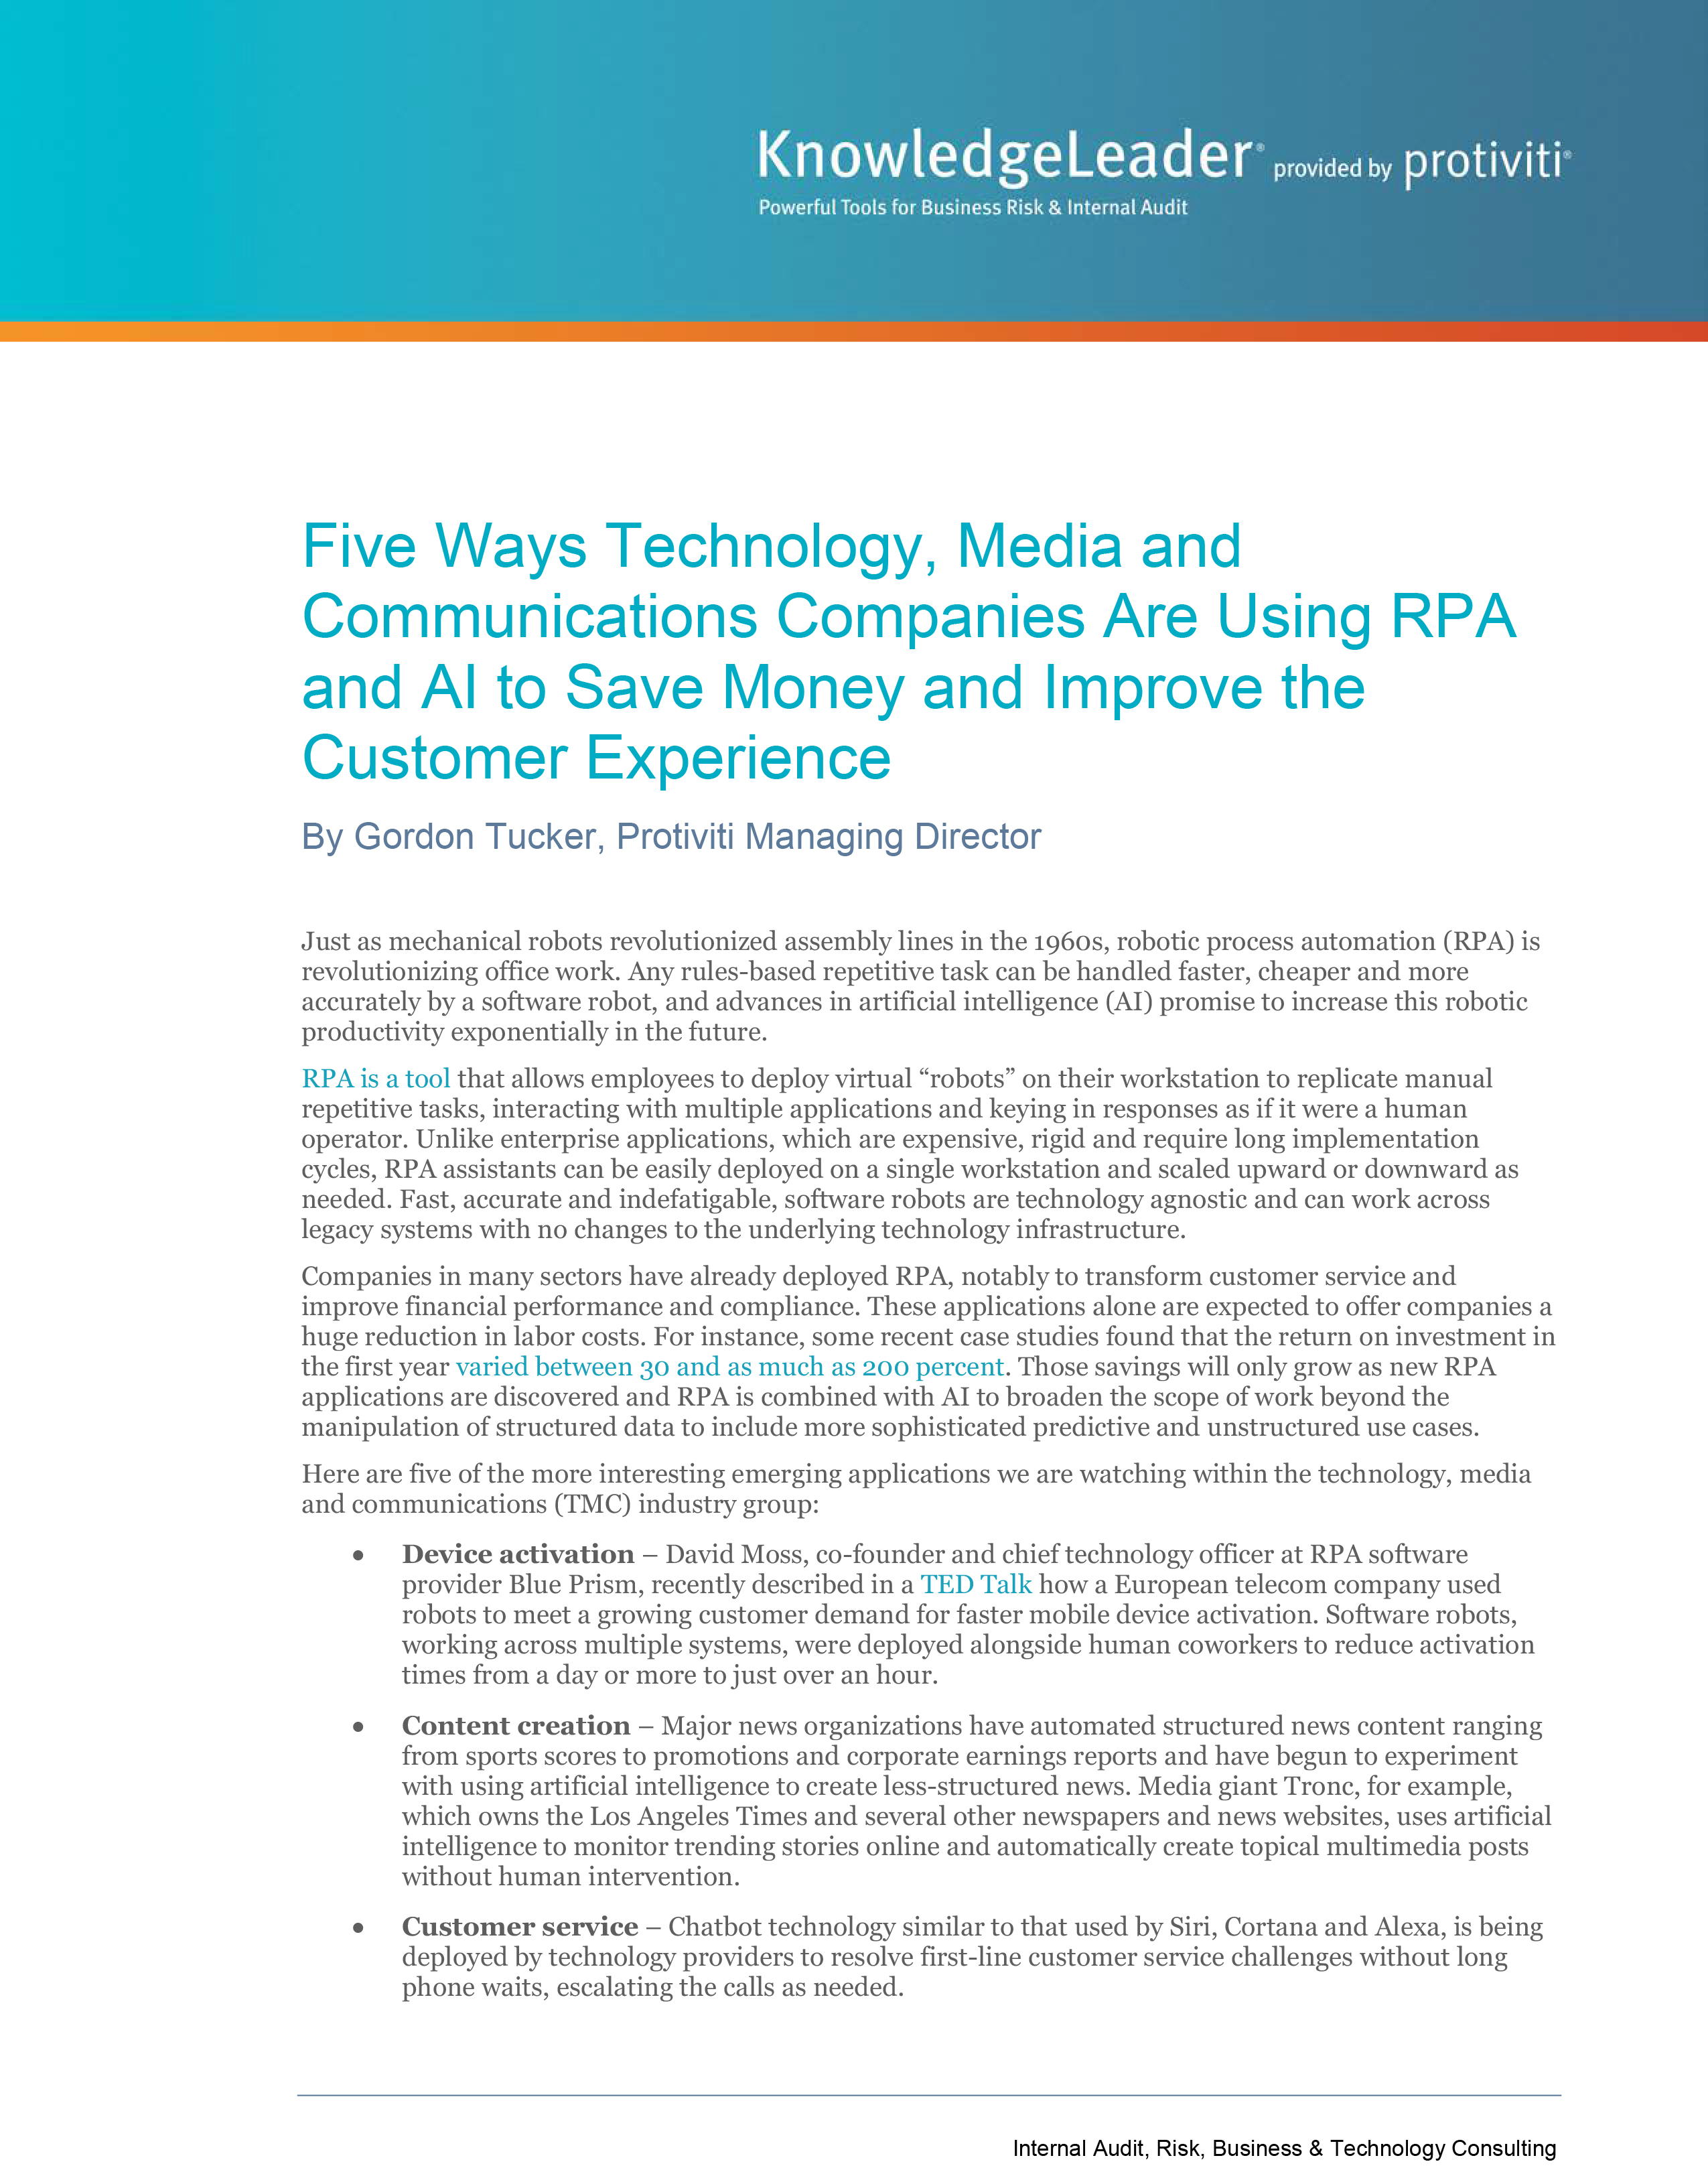 Screenshot of the first page of Five Ways Technology, Media and Communications Companies Are Using RPA and AI